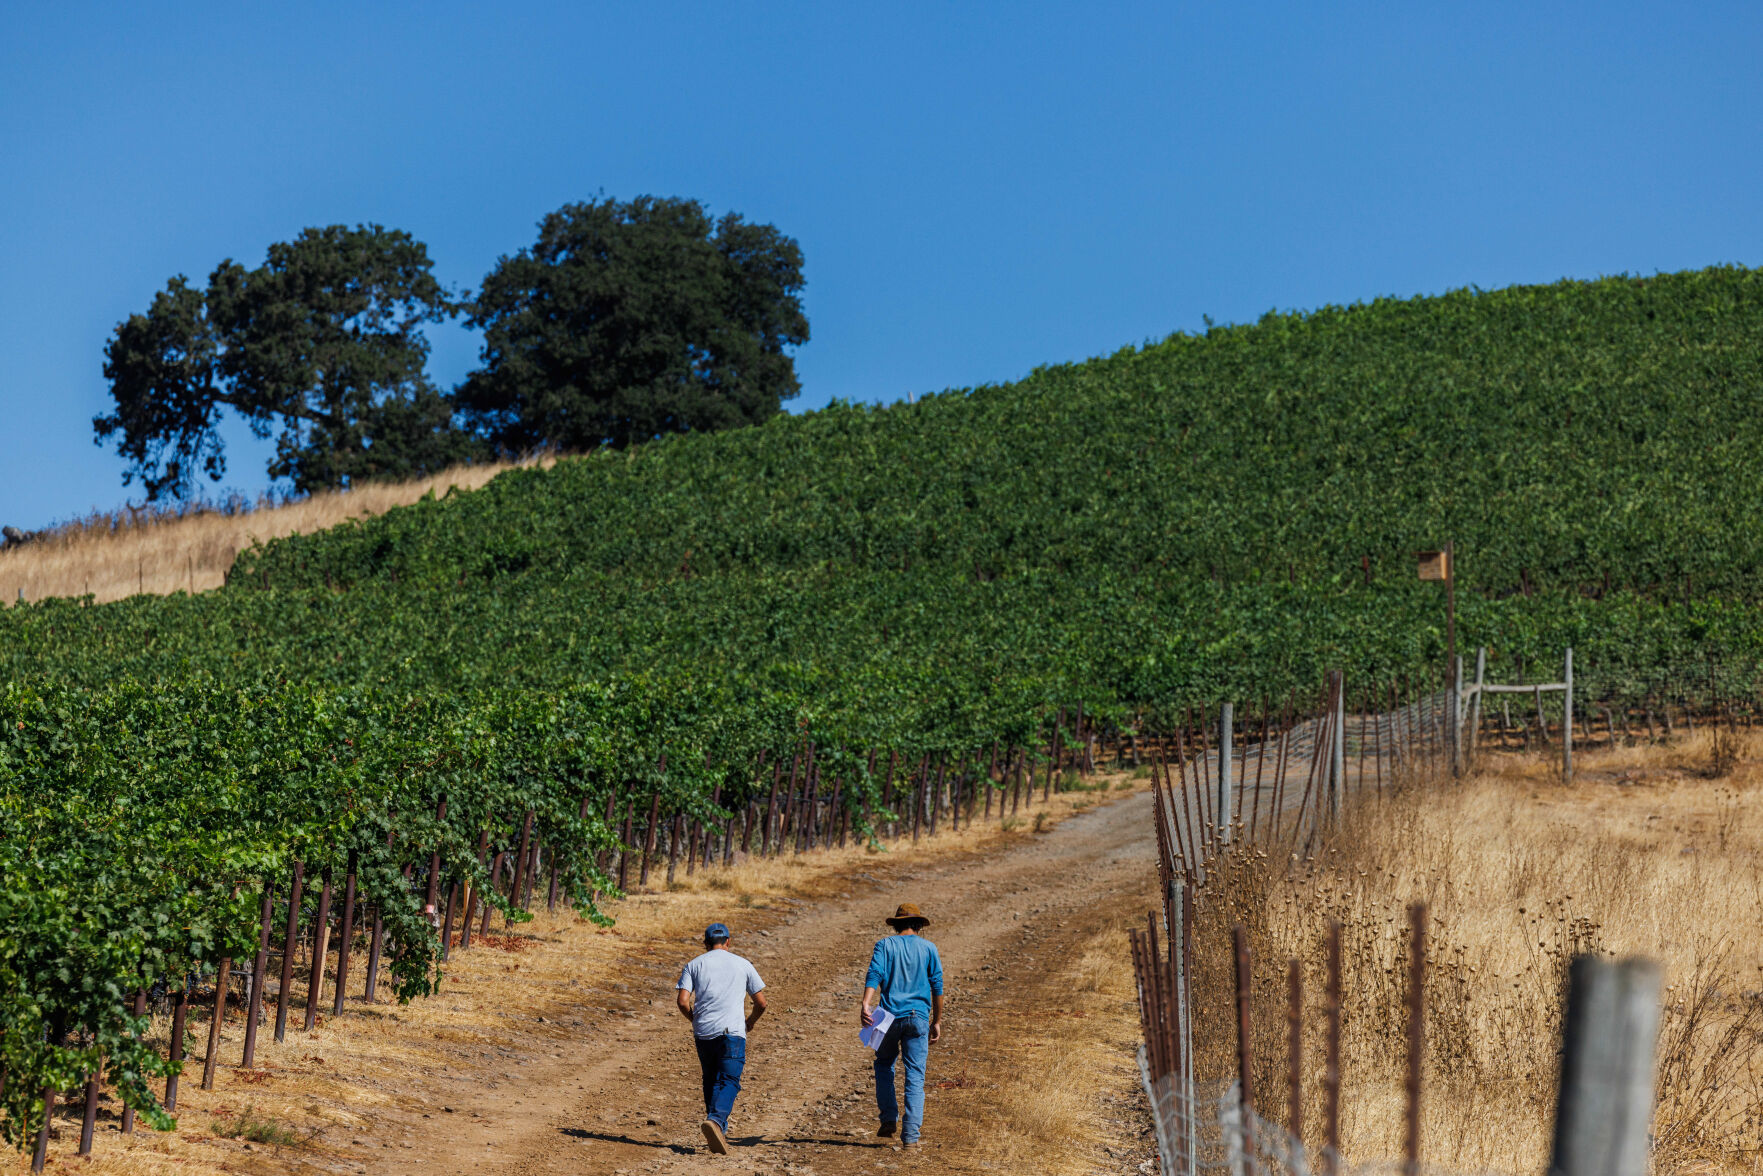 Expect busy October for Napa Valley grape harvest